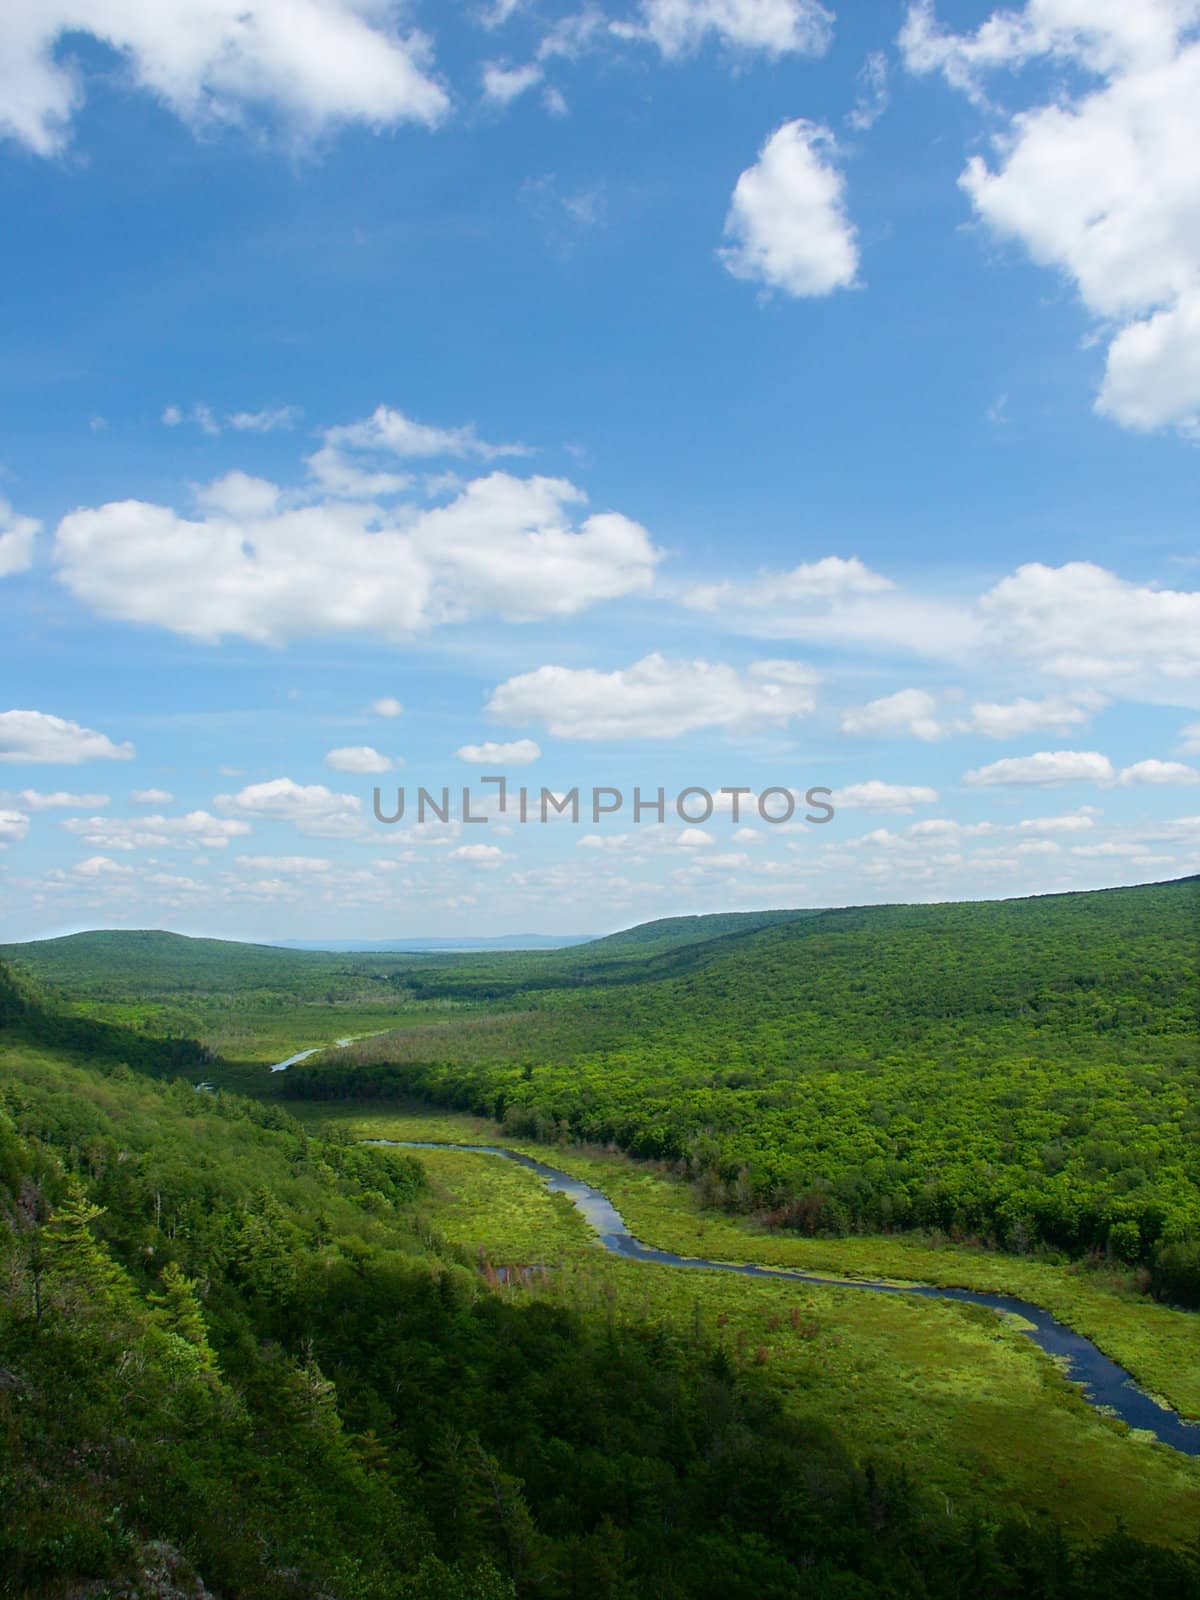 The Big Carp River at Porcupine Mountains State Park in Michigans upper peninsula.